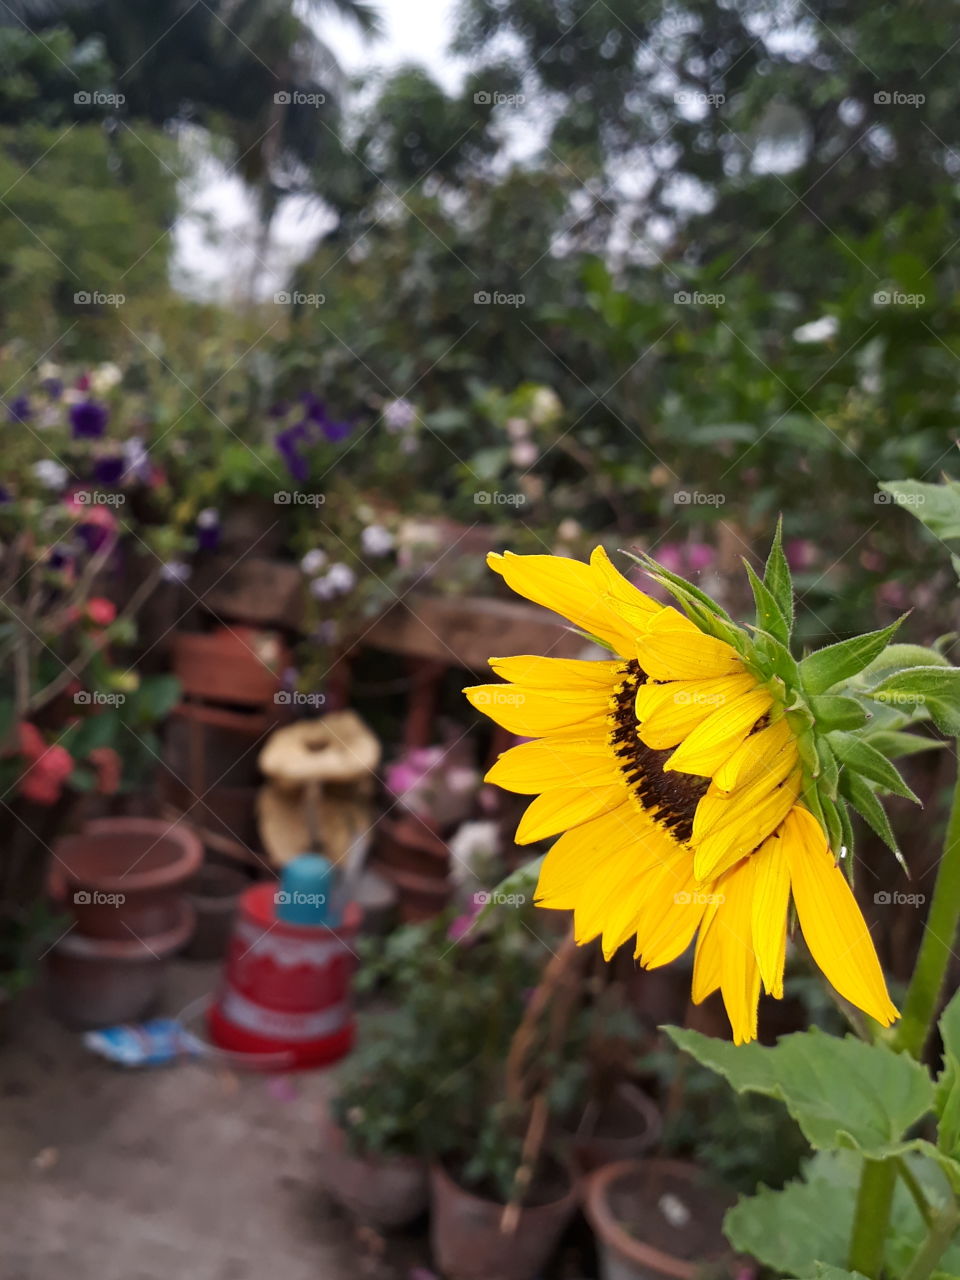 Sunflower in normal weather condition